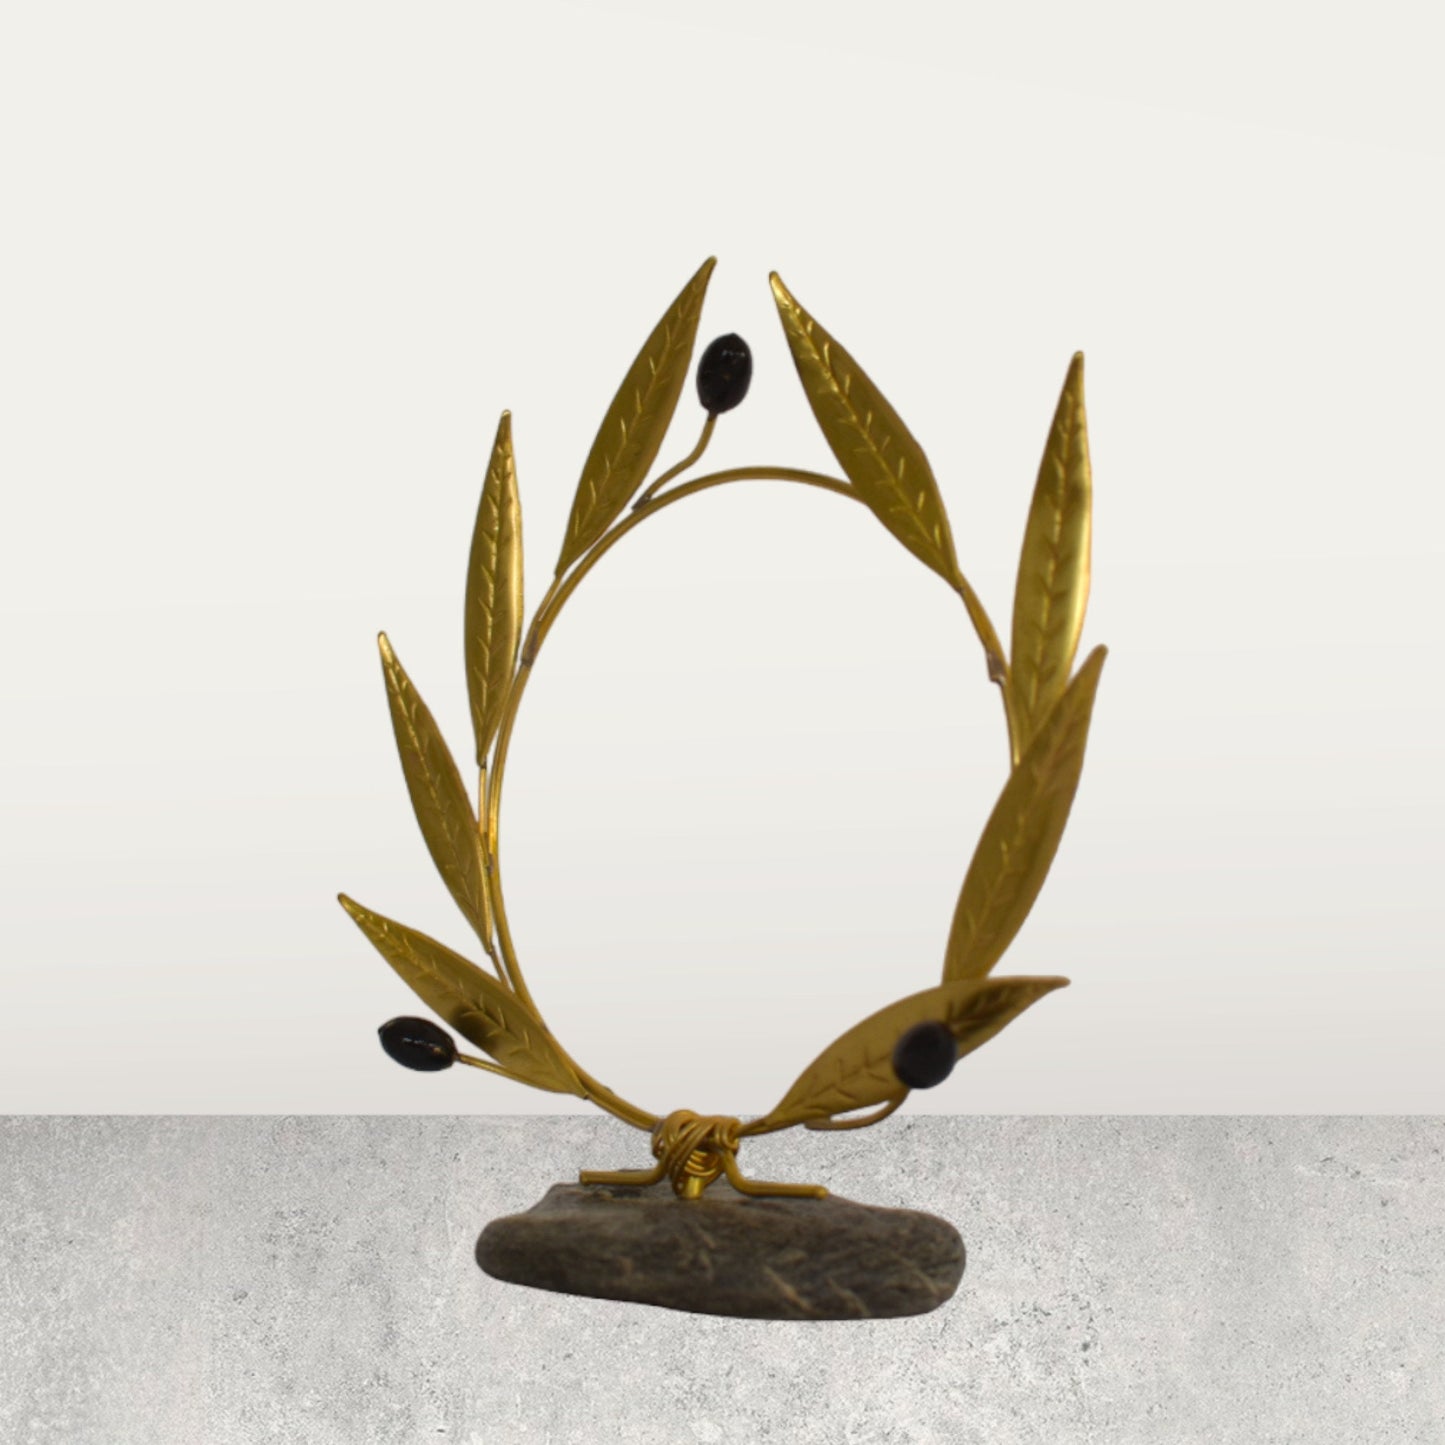 Kotinos  - Olive Wreath - Prize for the Winner at the Ancient Olympic Games - pure bronze  statue